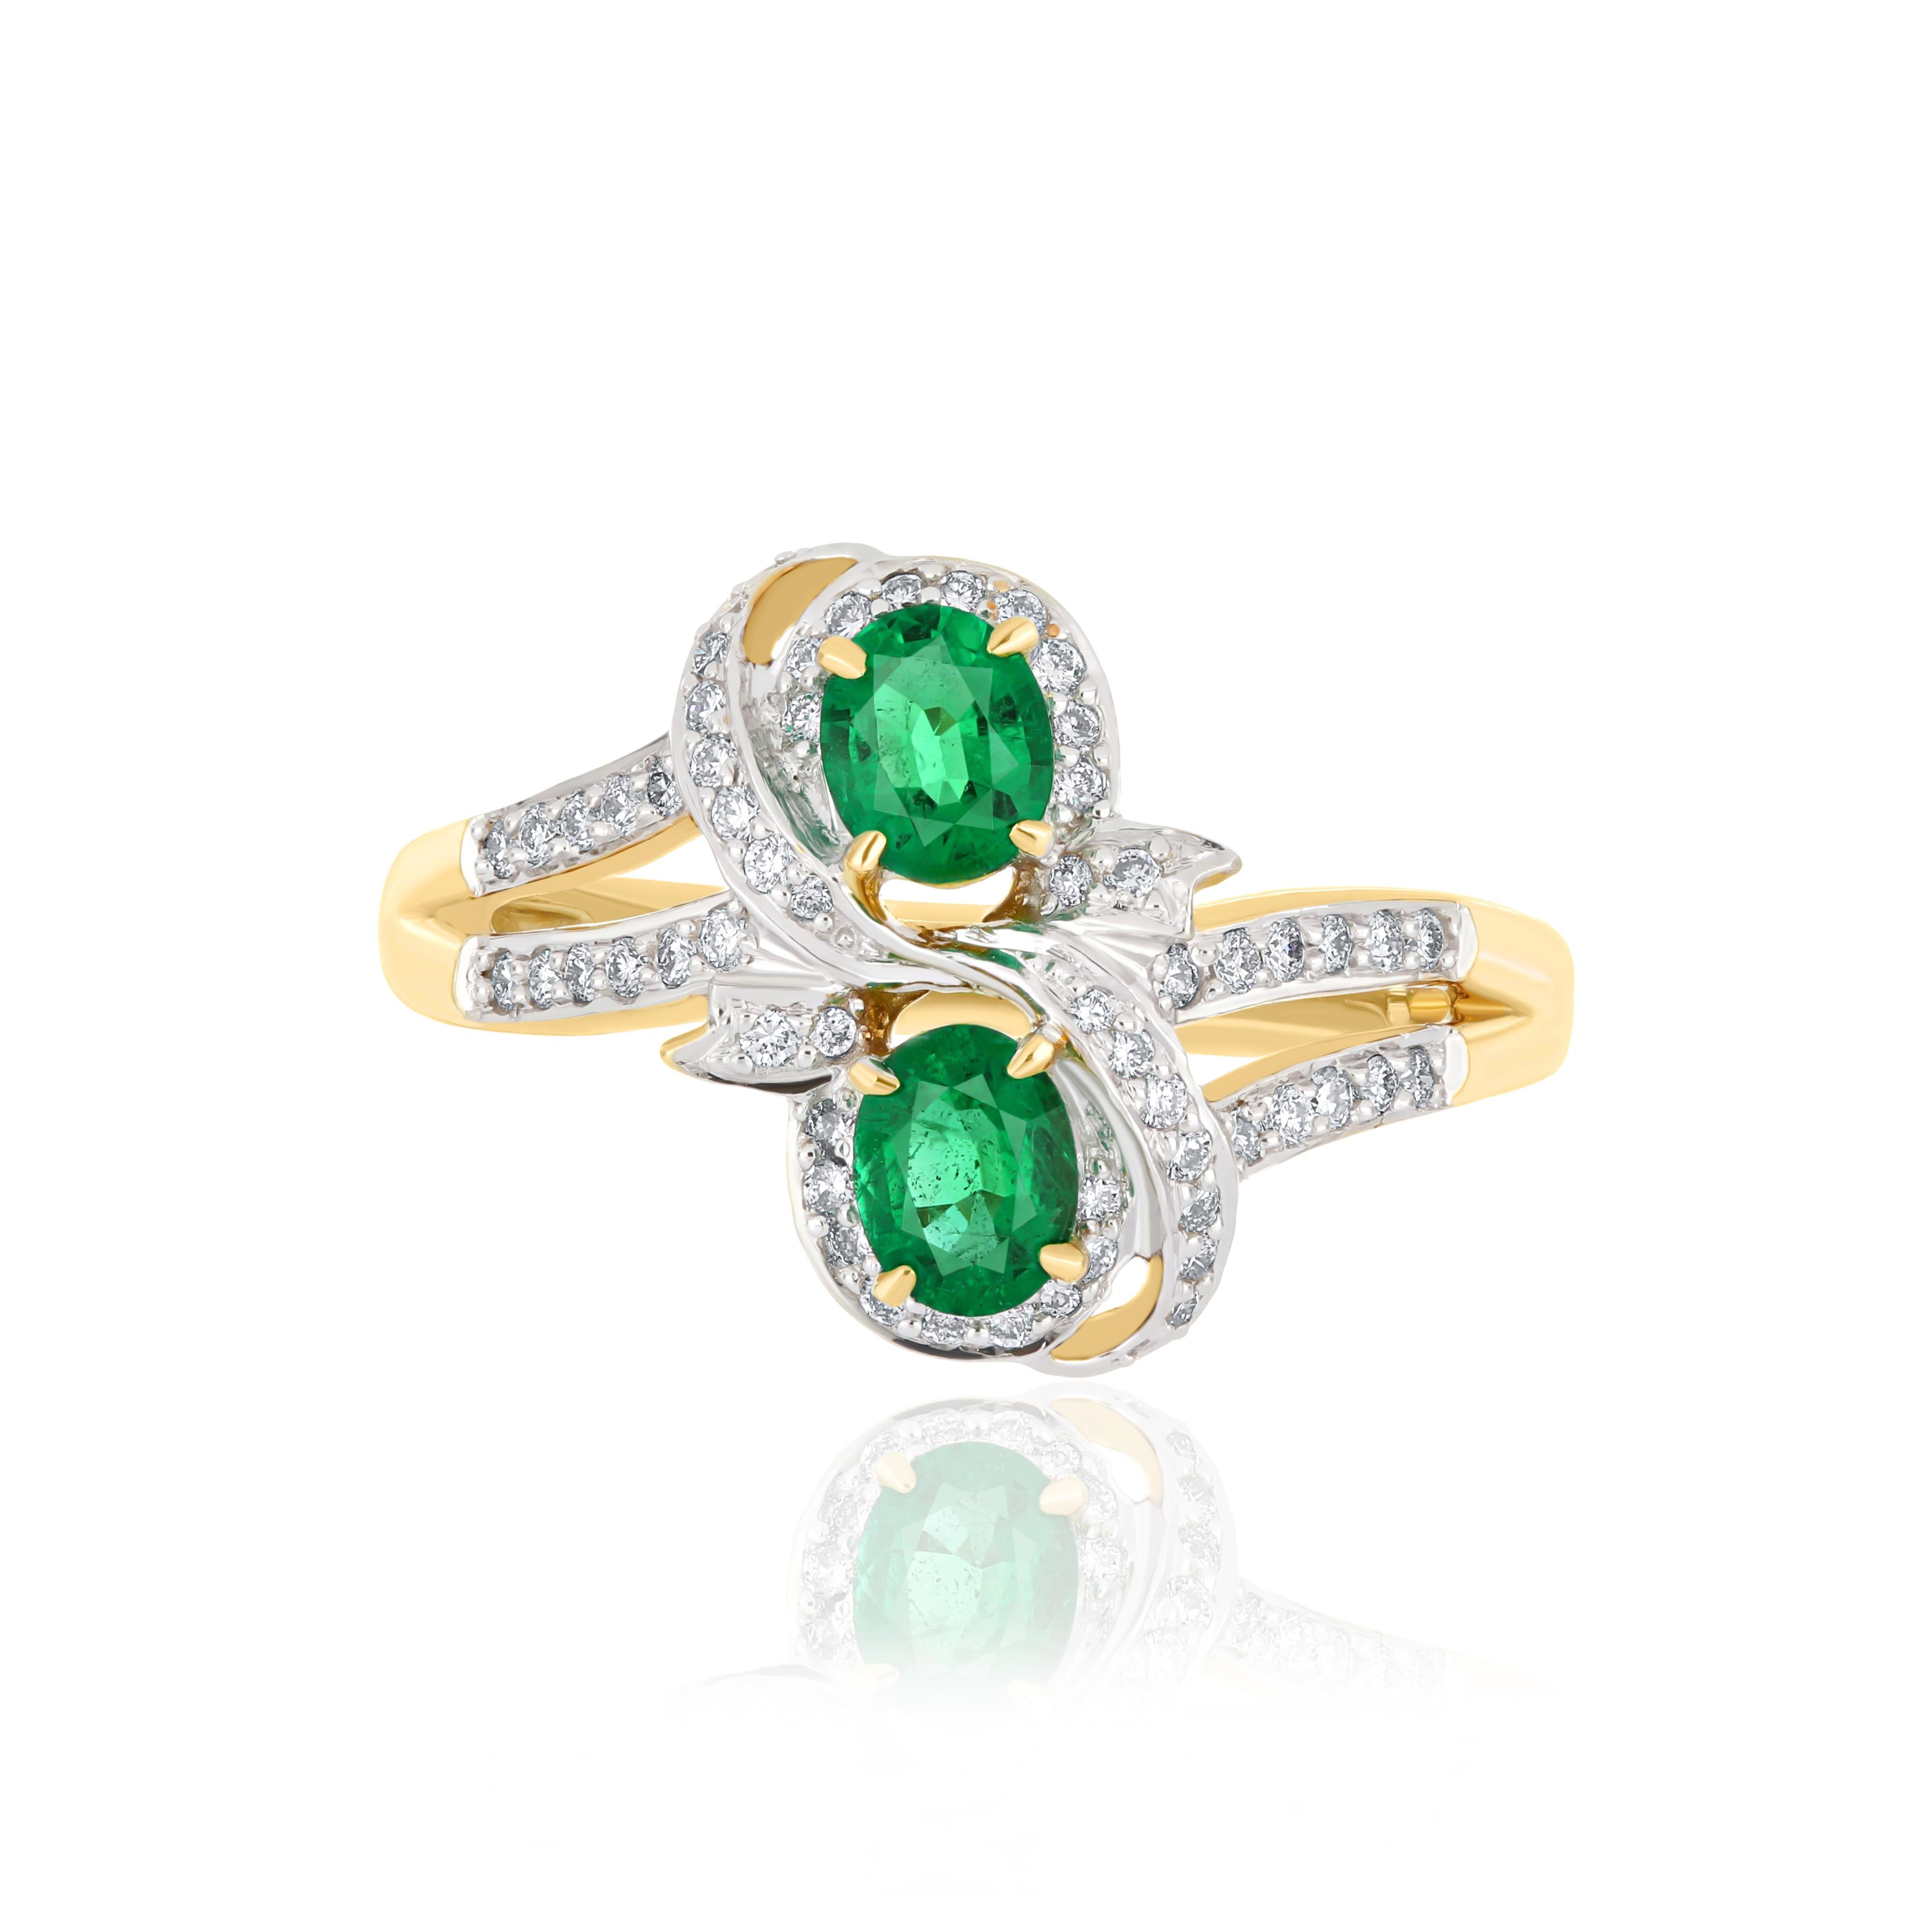 Elegant and exquisitely detailed 18 Karat Yellow Gold Ring, center set with 0.54Cts. Oval Shape Emerald and micro pave set Diamonds, weighing approx. 0.26Cts Beautifully Hand crafted in 18 Karat Yellow Gold.

Stone Detail:
Emerald: 5x4MM

Stone